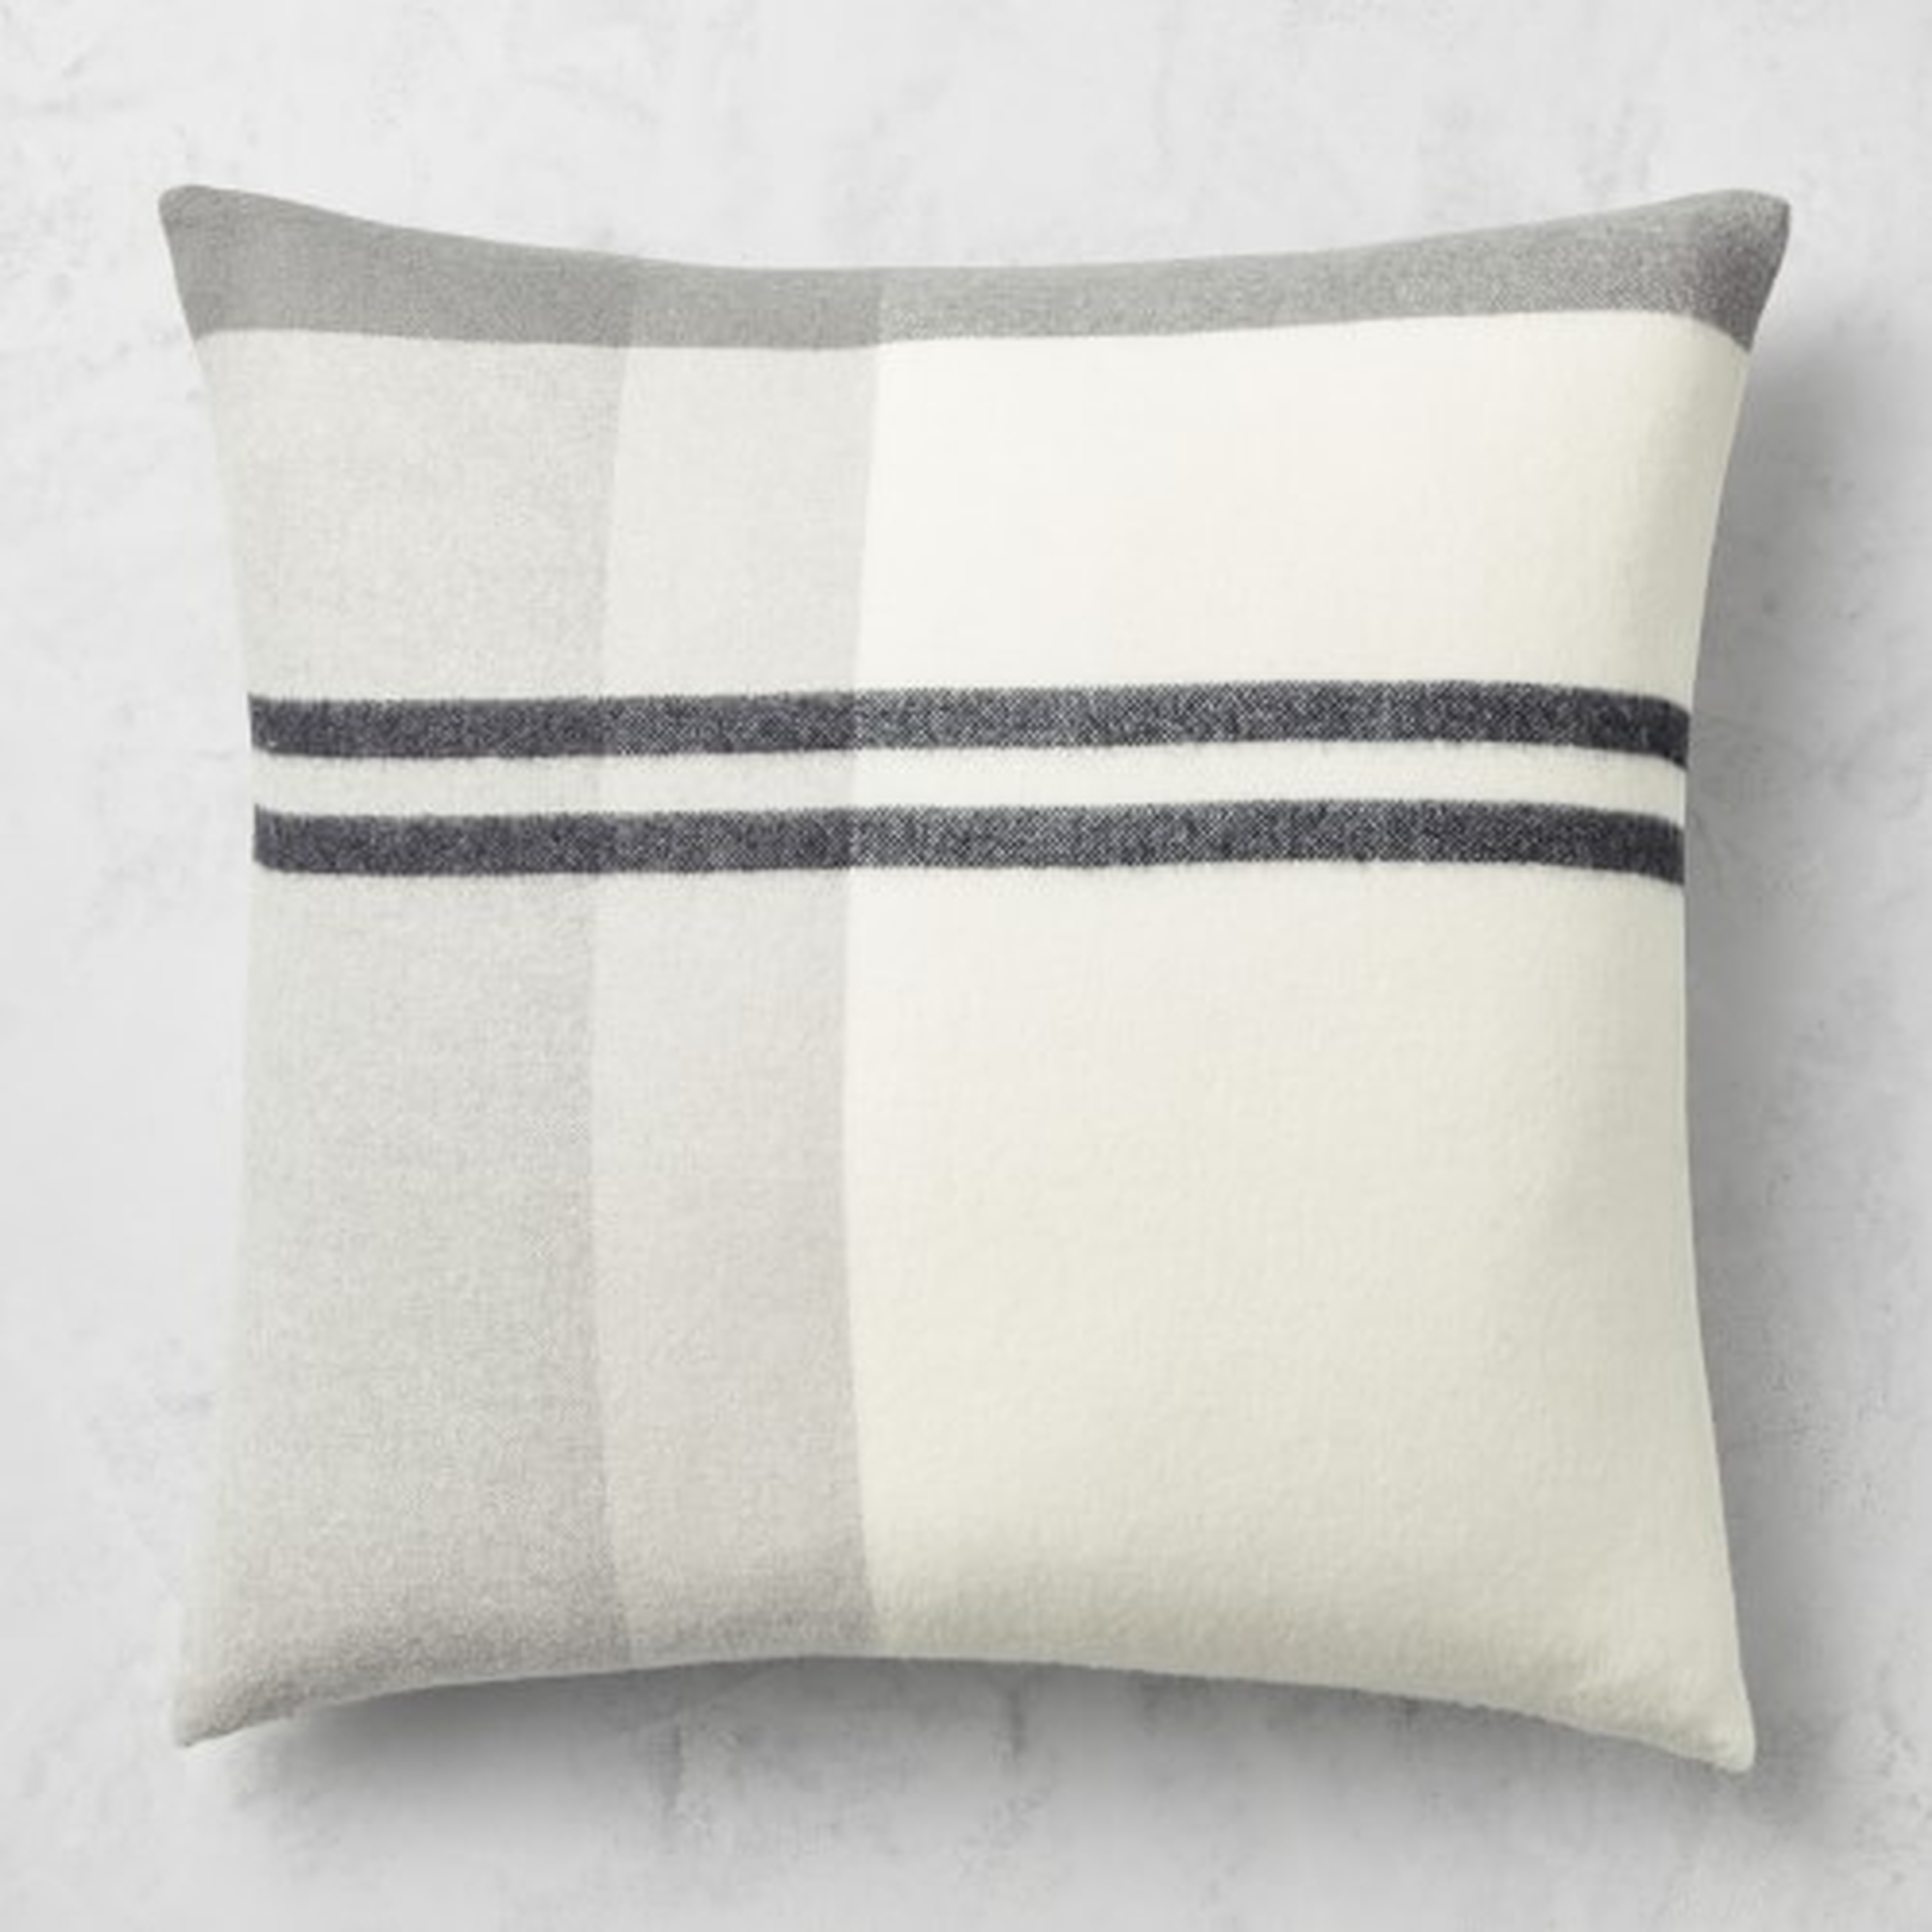 Plaid Lambswool Pillow Cover, 22" X 22", Grayson Black - Williams Sonoma